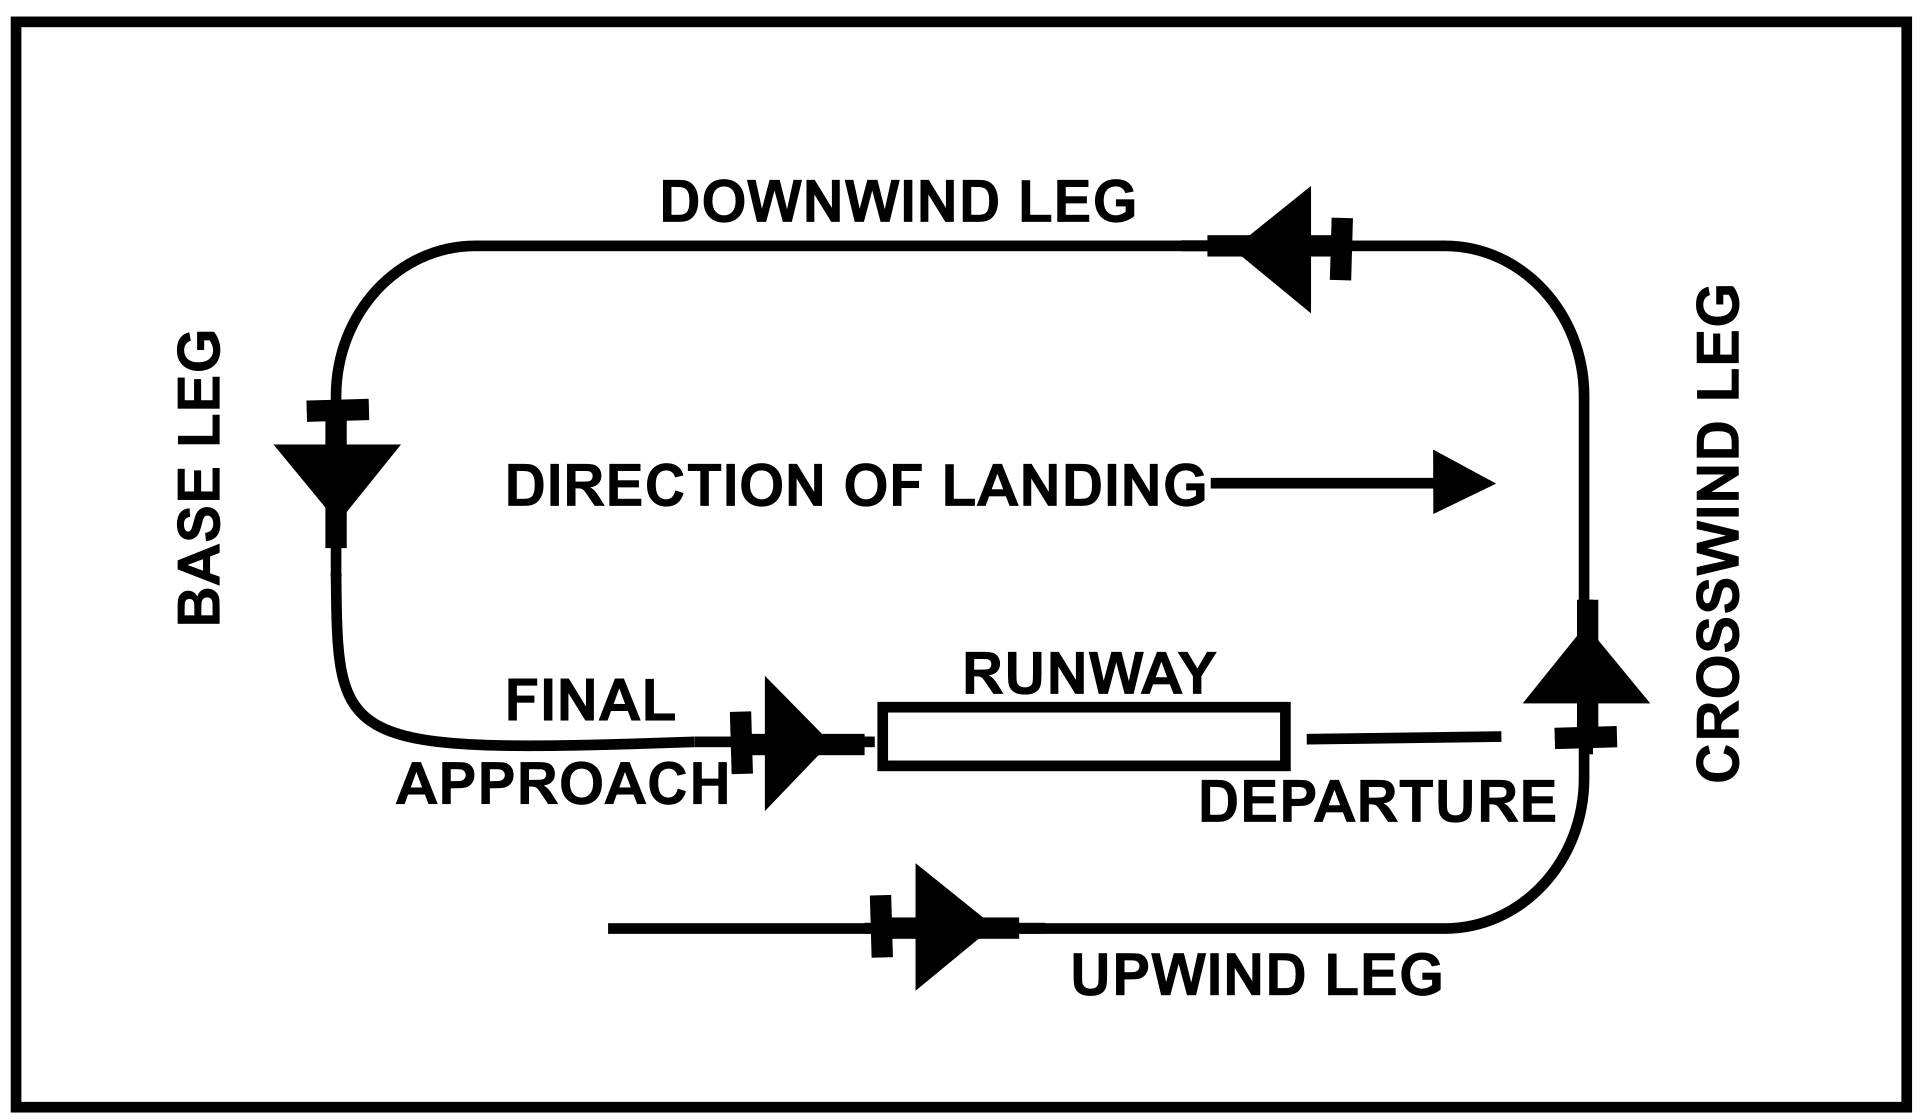 Components of a traffic Pattern. Fig. 4-3-1 for pilot from FAA AIM.